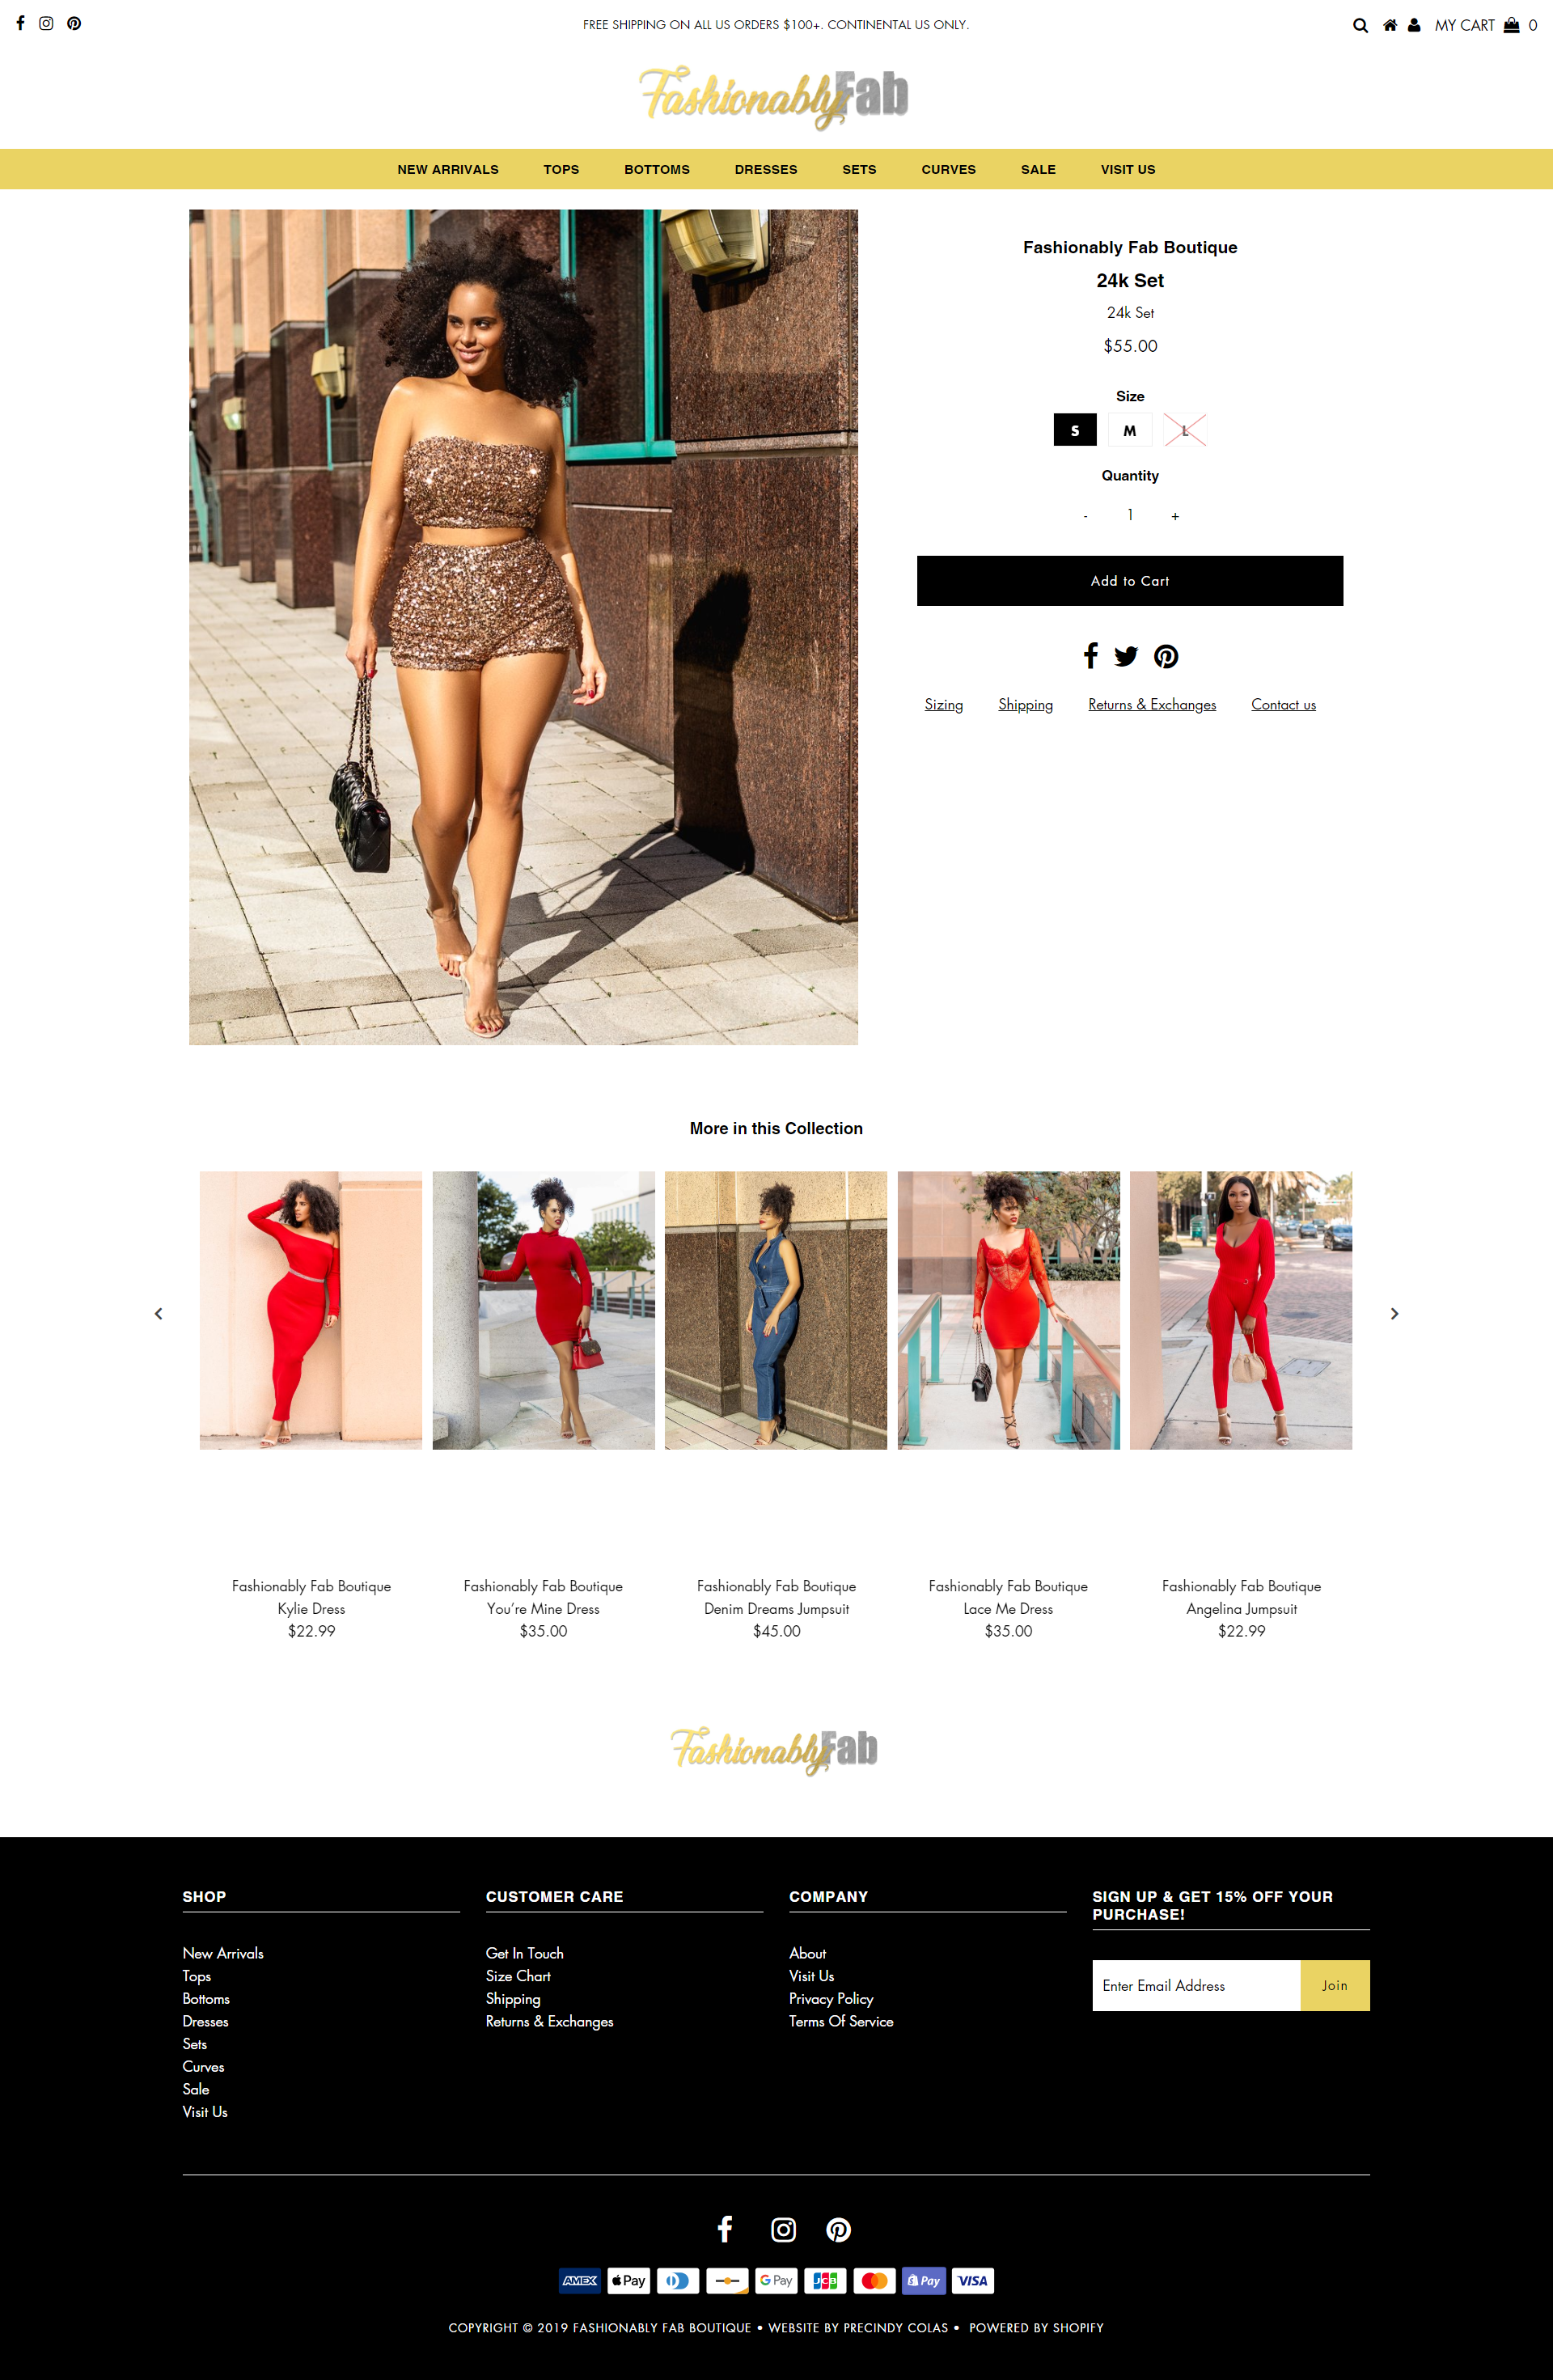 precindy-colas-fashionably-fab-boutique-web-design-product-page.png